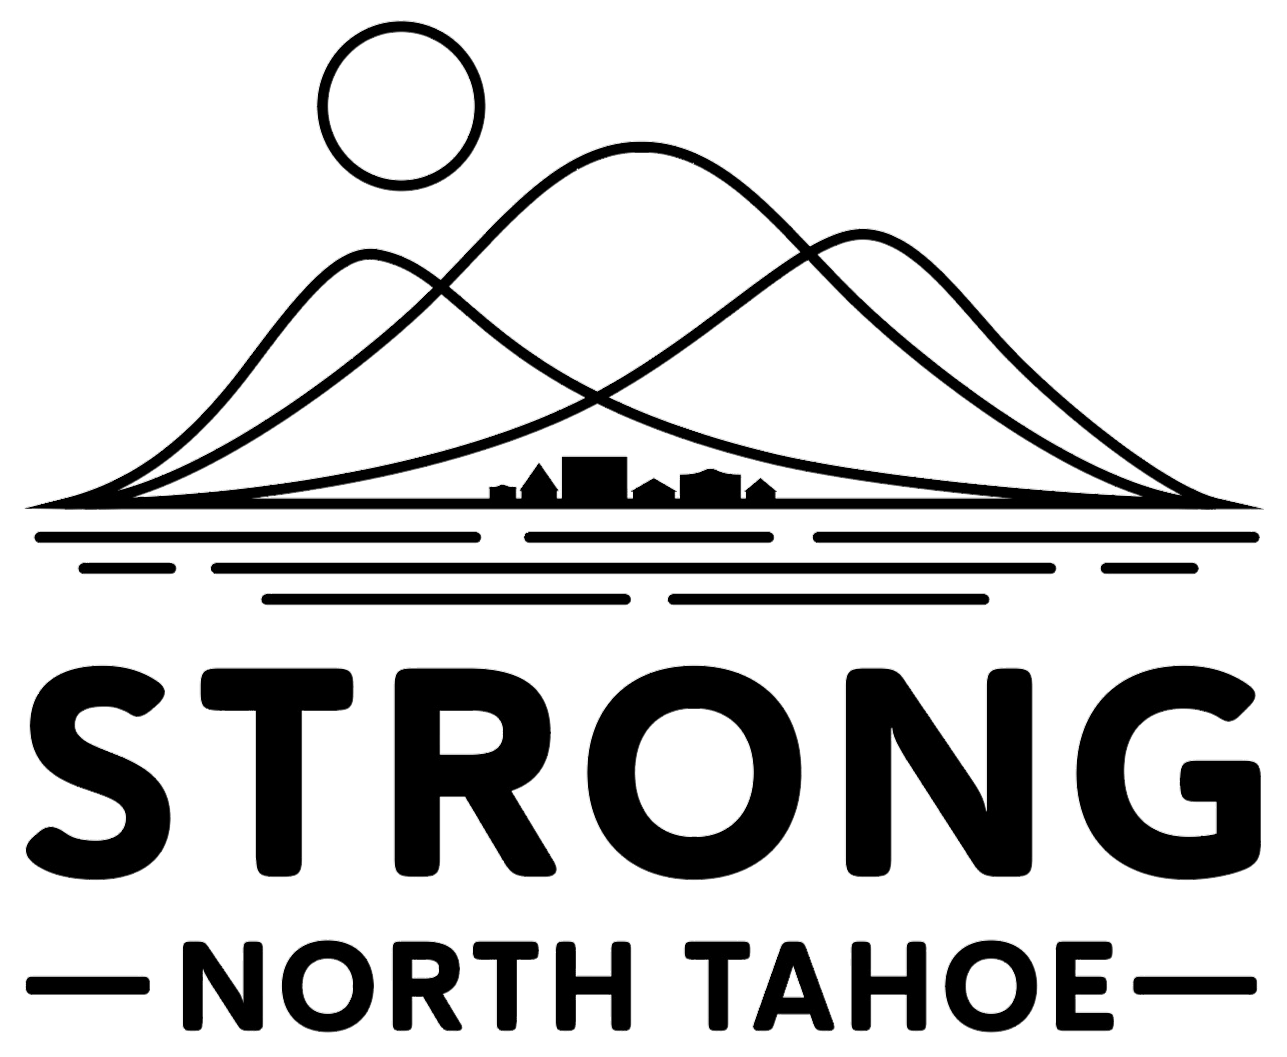 Strong North Tahoe's Logo